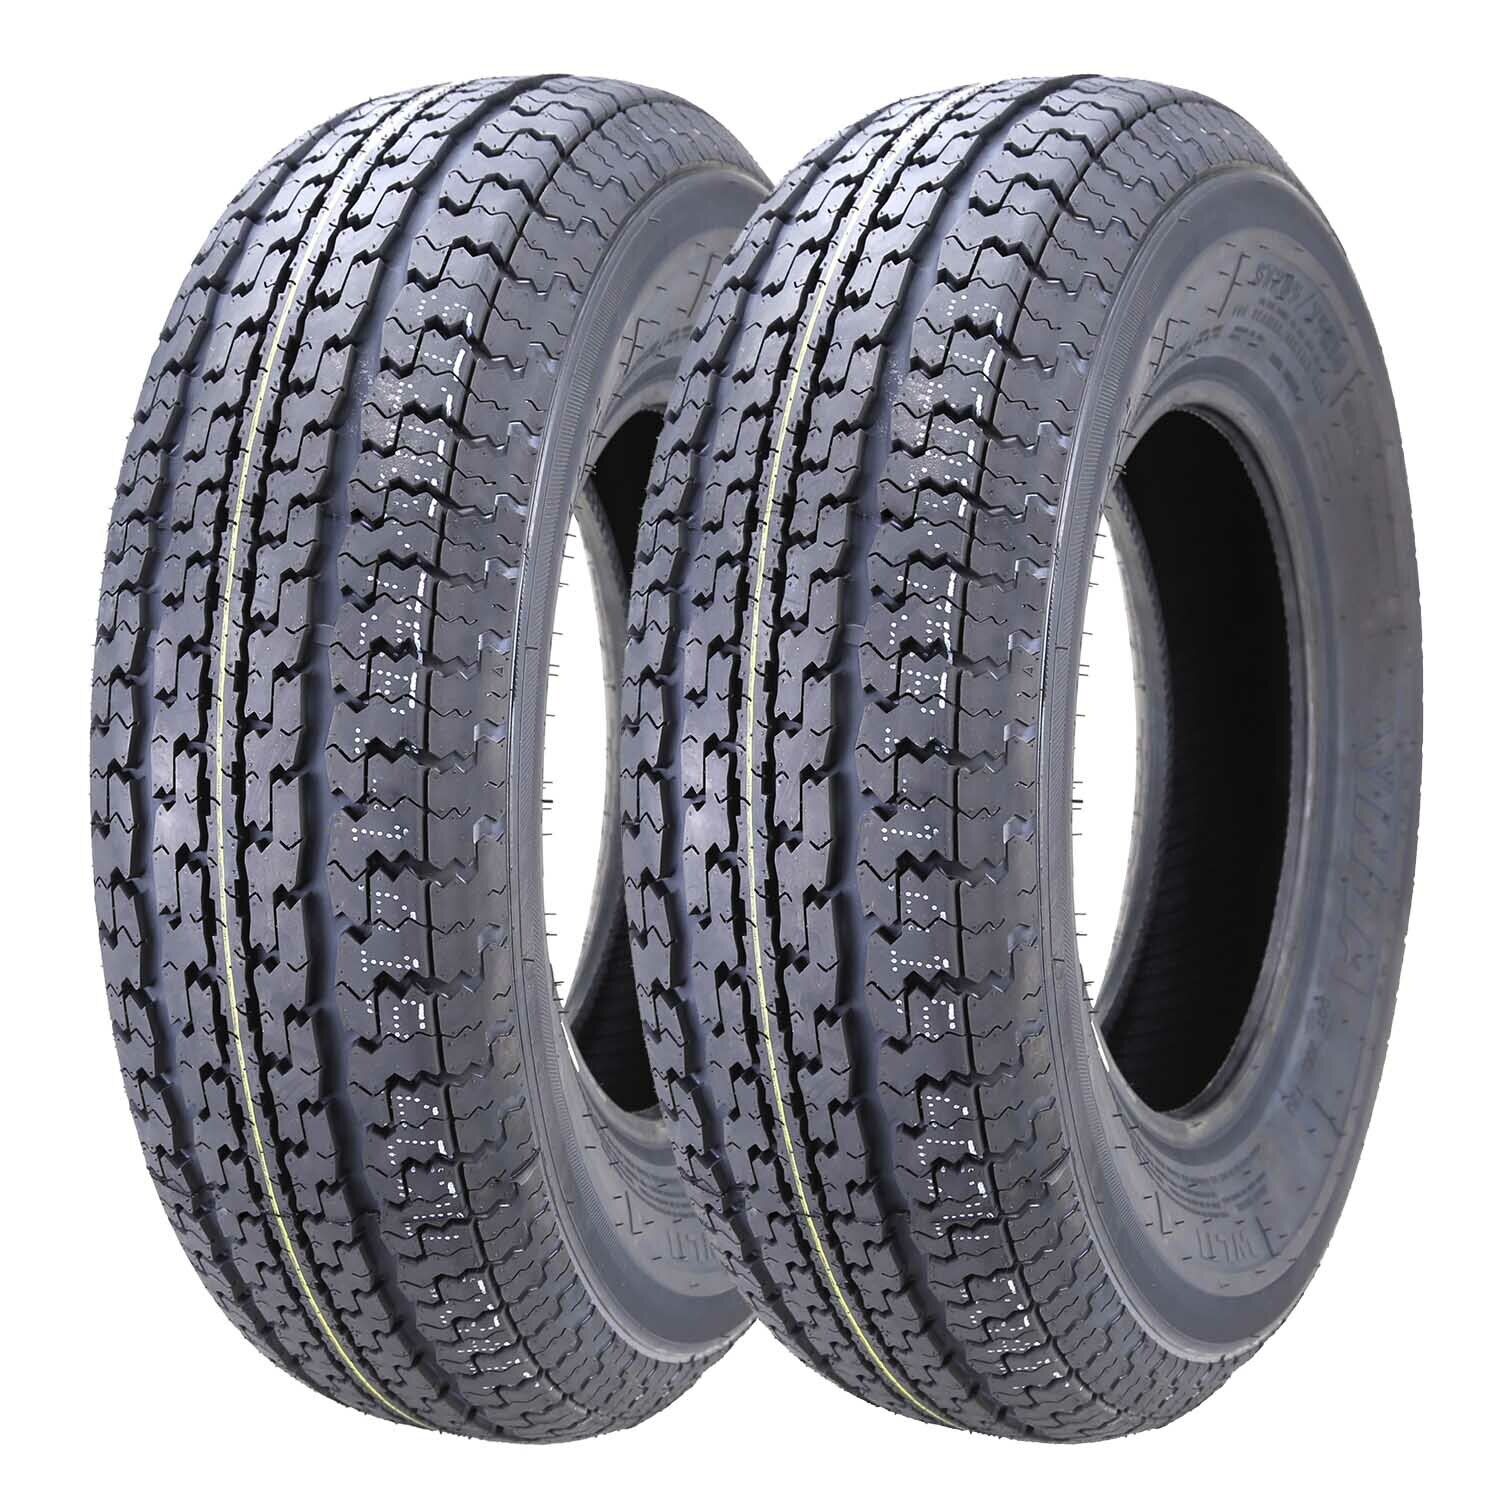 Set 2 FREE COUNTRY Heavy Duty Trailer Tire ST185/80R13 Radial 8 Ply Load Range D